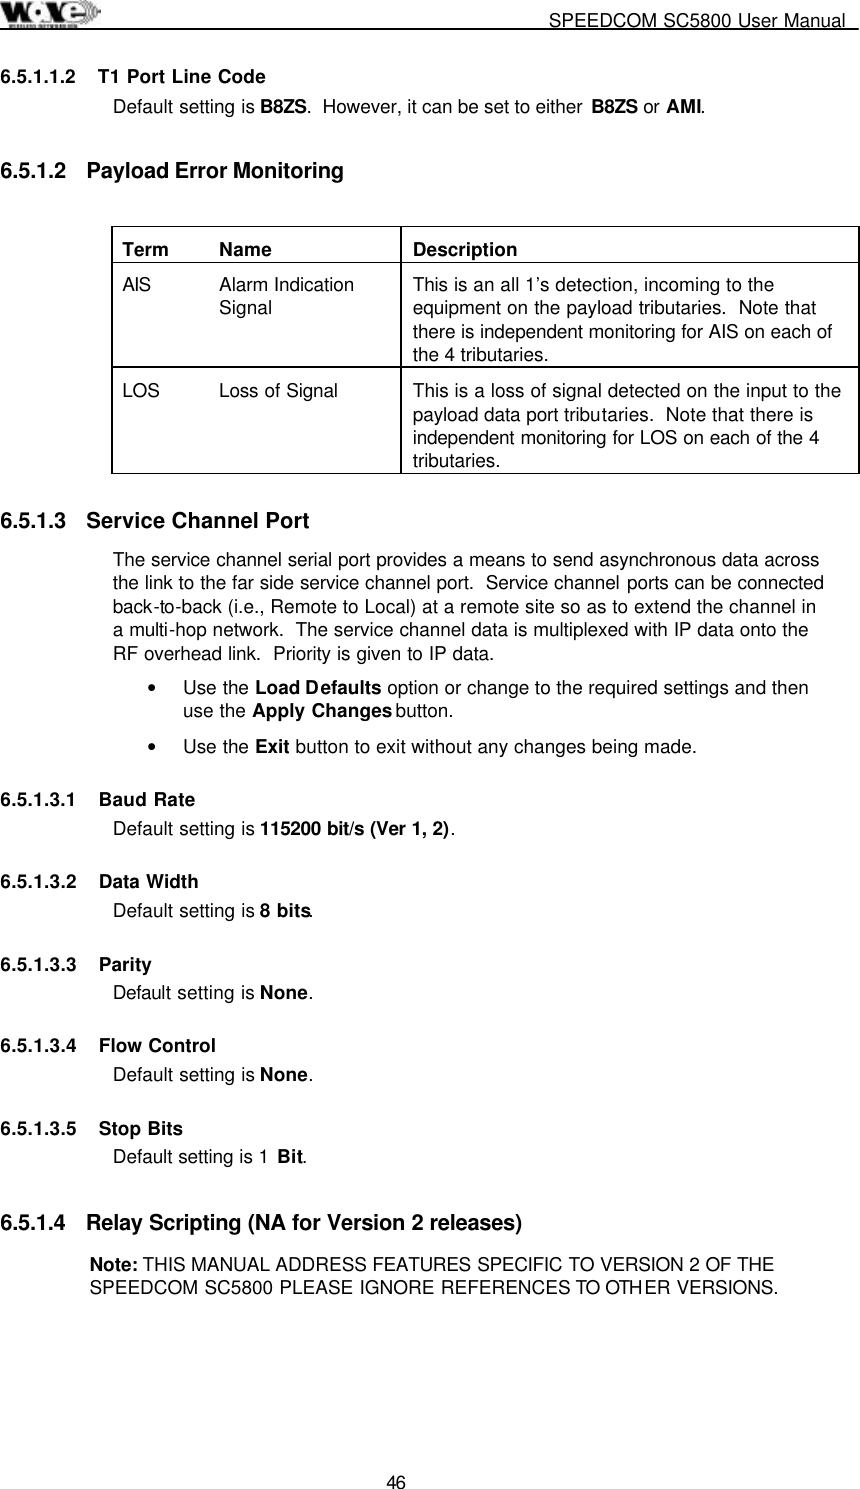     SPEEDCOM SC5800 User Manual  46 6.5.1.1.2  T1 Port Line Code Default setting is B8ZS.  However, it can be set to either  B8ZS or AMI. 6.5.1.2  Payload Error Monitoring  Term  Name  Description AIS Alarm Indication Signal  This is an all 1’s detection, incoming to the equipment on the payload tributaries.  Note that there is independent monitoring for AIS on each of the 4 tributaries. LOS  Loss of Signal  This is a loss of signal detected on the input to the payload data port tributaries.  Note that there is independent monitoring for LOS on each of the 4 tributaries. 6.5.1.3  Service Channel Port The service channel serial port provides a means to send asynchronous data across the link to the far side service channel port.  Service channel ports can be connected back-to-back (i.e., Remote to Local) at a remote site so as to extend the channel in a multi-hop network.  The service channel data is multiplexed with IP data onto the RF overhead link.  Priority is given to IP data. •  Use the Load Defaults option or change to the required settings and then use the Apply Changes button. •  Use the Exit button to exit without any changes being made. 6.5.1.3.1 Baud Rate Default setting is 115200 bit/s (Ver 1, 2).  6.5.1.3.2  Data Width  Default setting is 8 bits.   6.5.1.3.3  Parity Default setting is None.   6.5.1.3.4  Flow Control Default setting is None.   6.5.1.3.5 Stop Bits Default setting is 1 Bit.   6.5.1.4  Relay Scripting (NA for Version 2 releases)  Note: THIS MANUAL ADDRESS FEATURES SPECIFIC TO VERSION 2 OF THE SPEEDCOM SC5800 PLEASE IGNORE REFERENCES TO OTHER VERSIONS. 